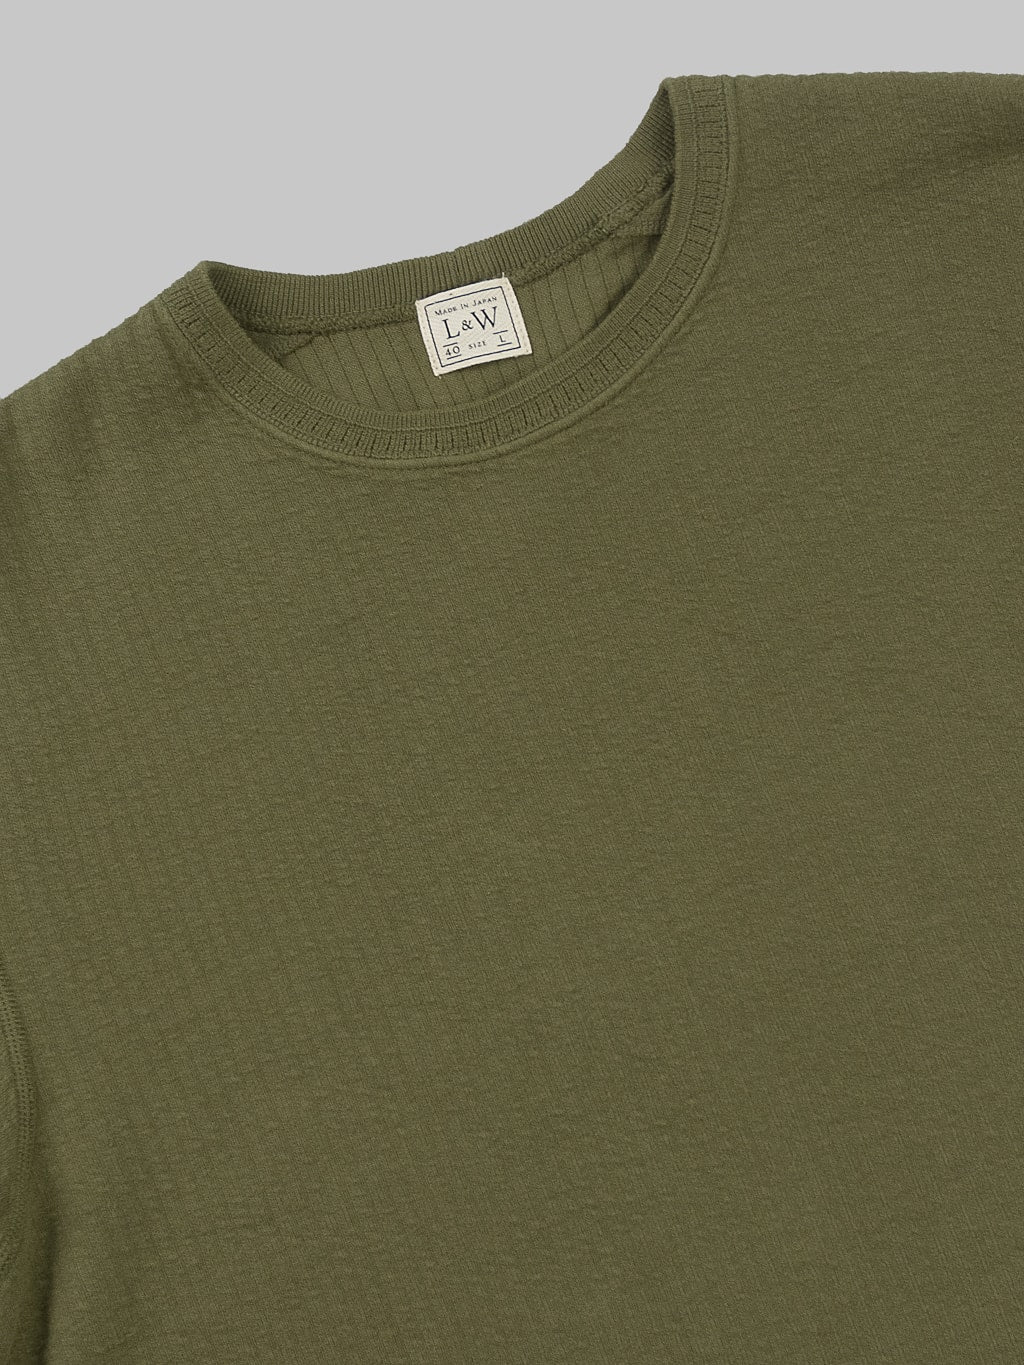 Loop & Weft Double Face Jacquard Crewneck Thermal Army Olive